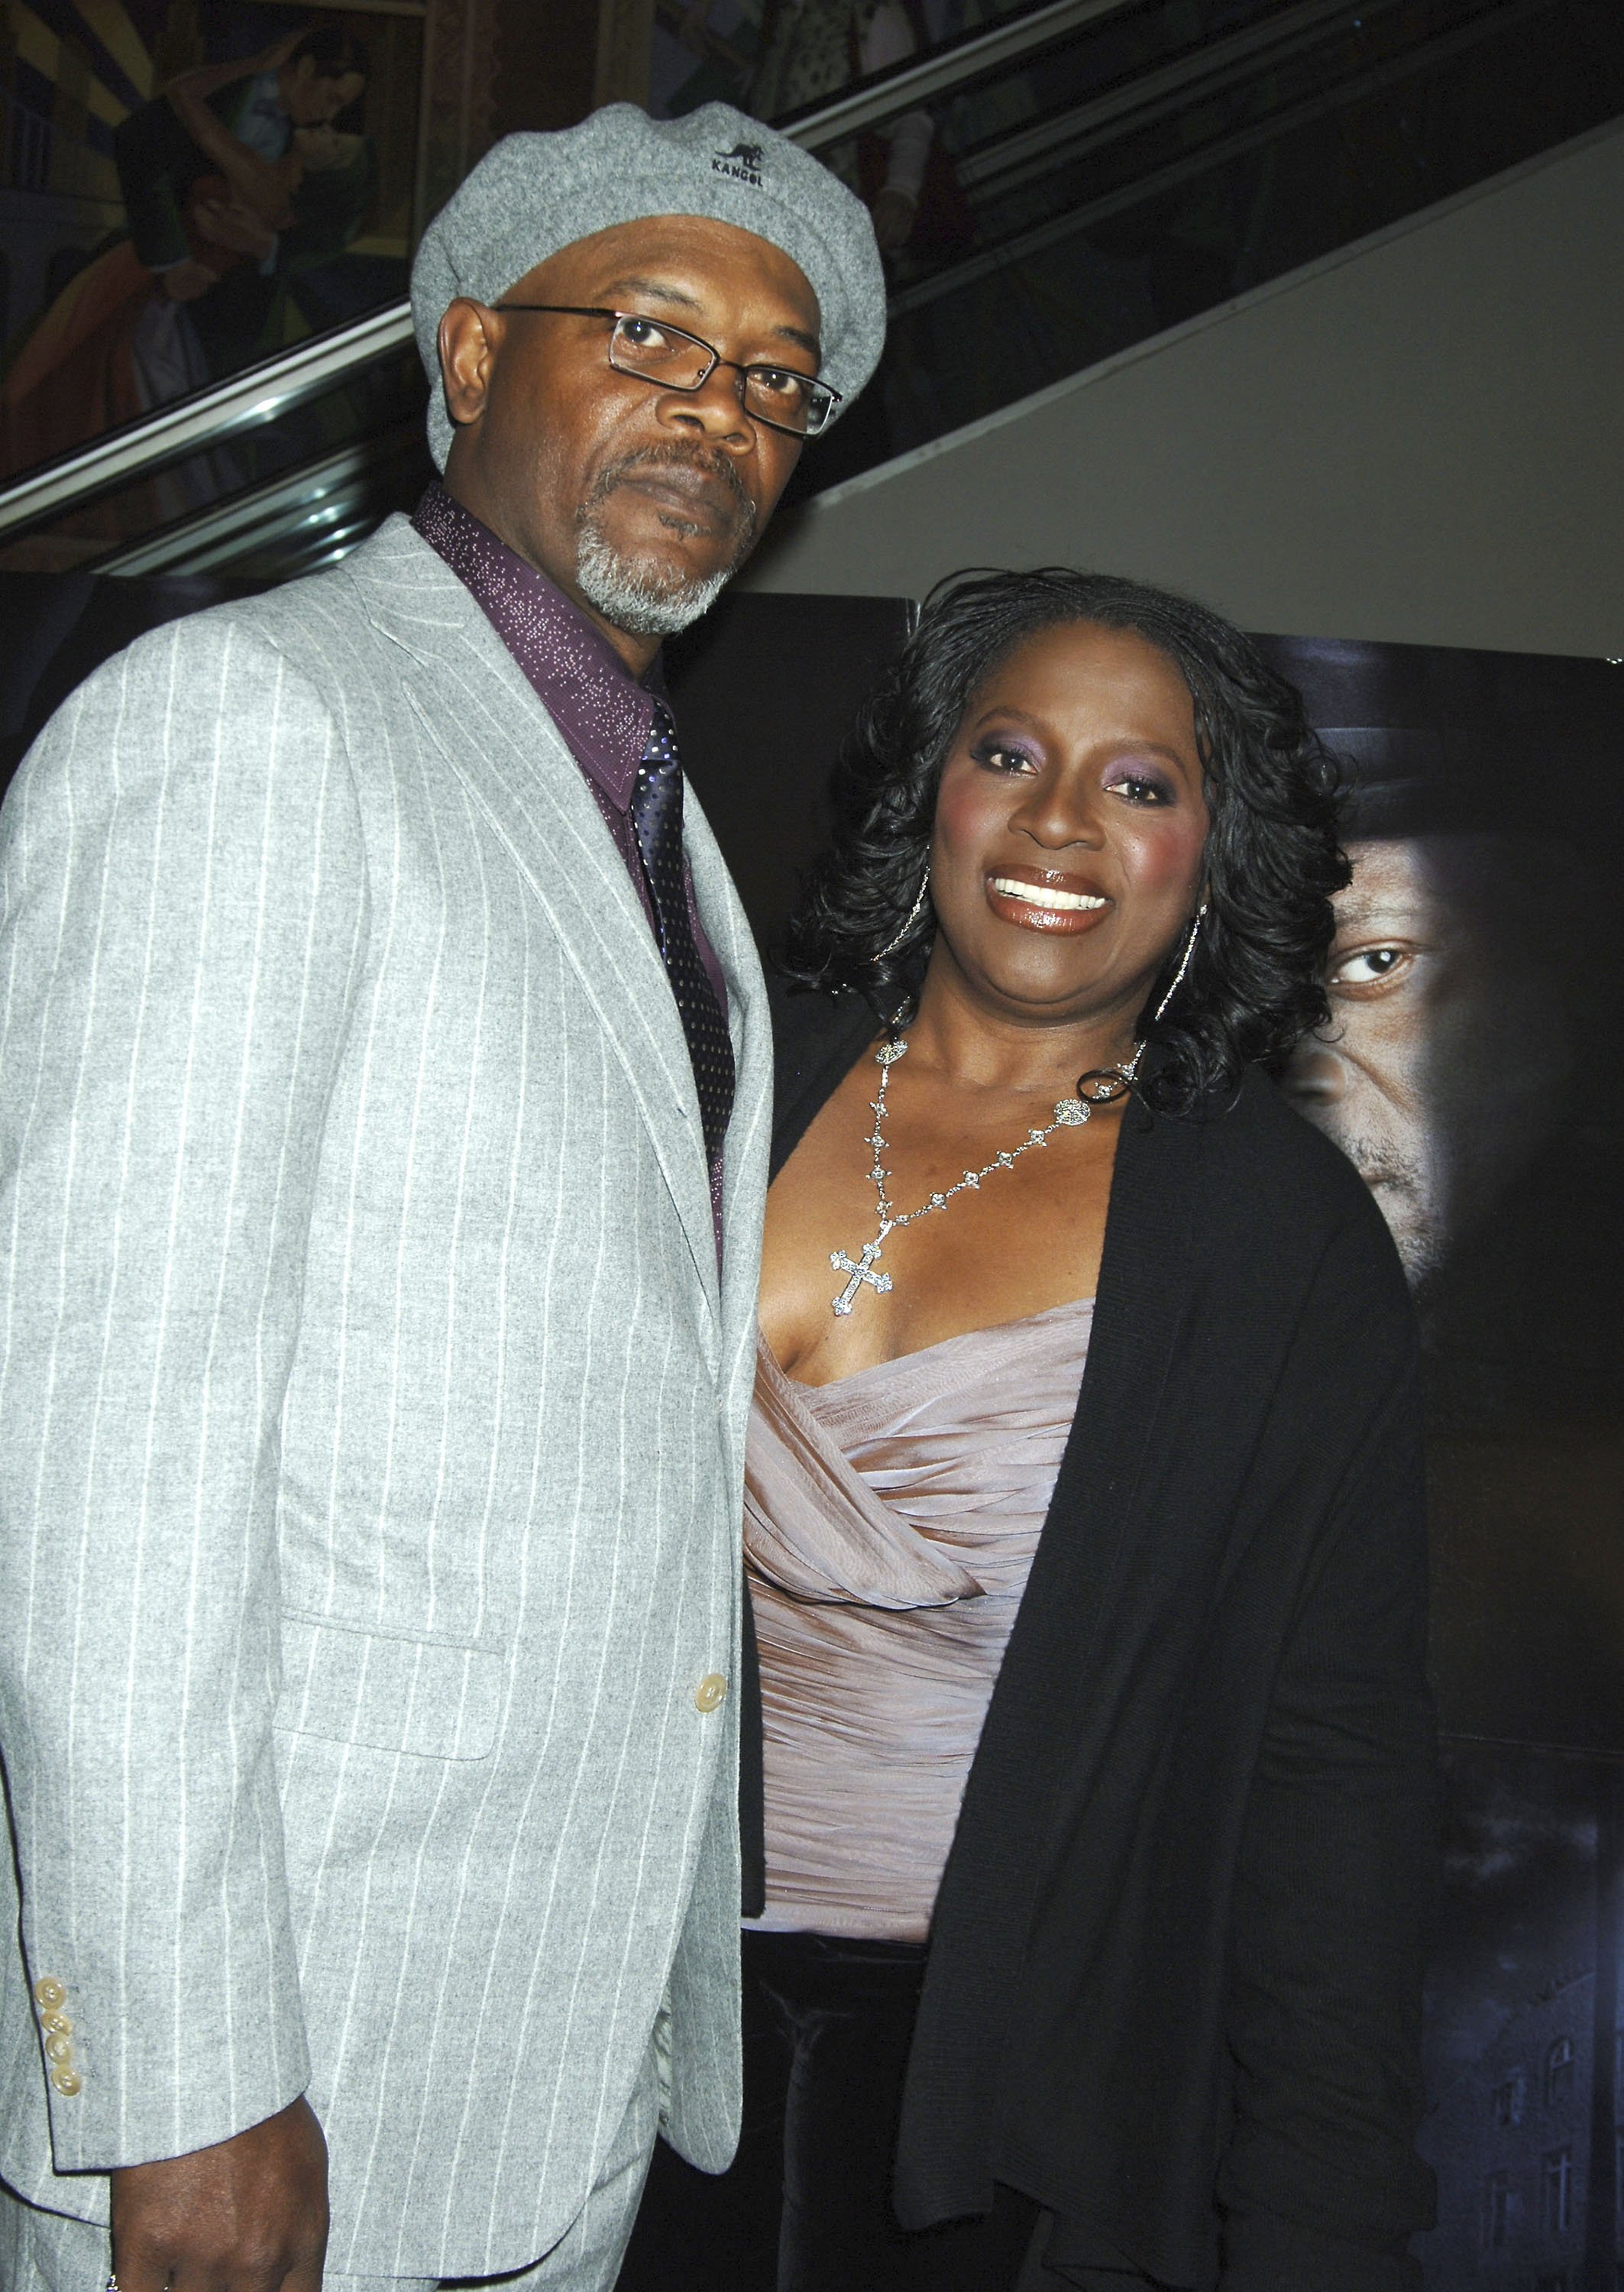 Samuel L Jackson and LaTanya Richardson during "Freedomland" World Premiere - Inside Arrivals at The Loews Lincoln Square Theatre in New York, New York, United States. | Source: Getty Images